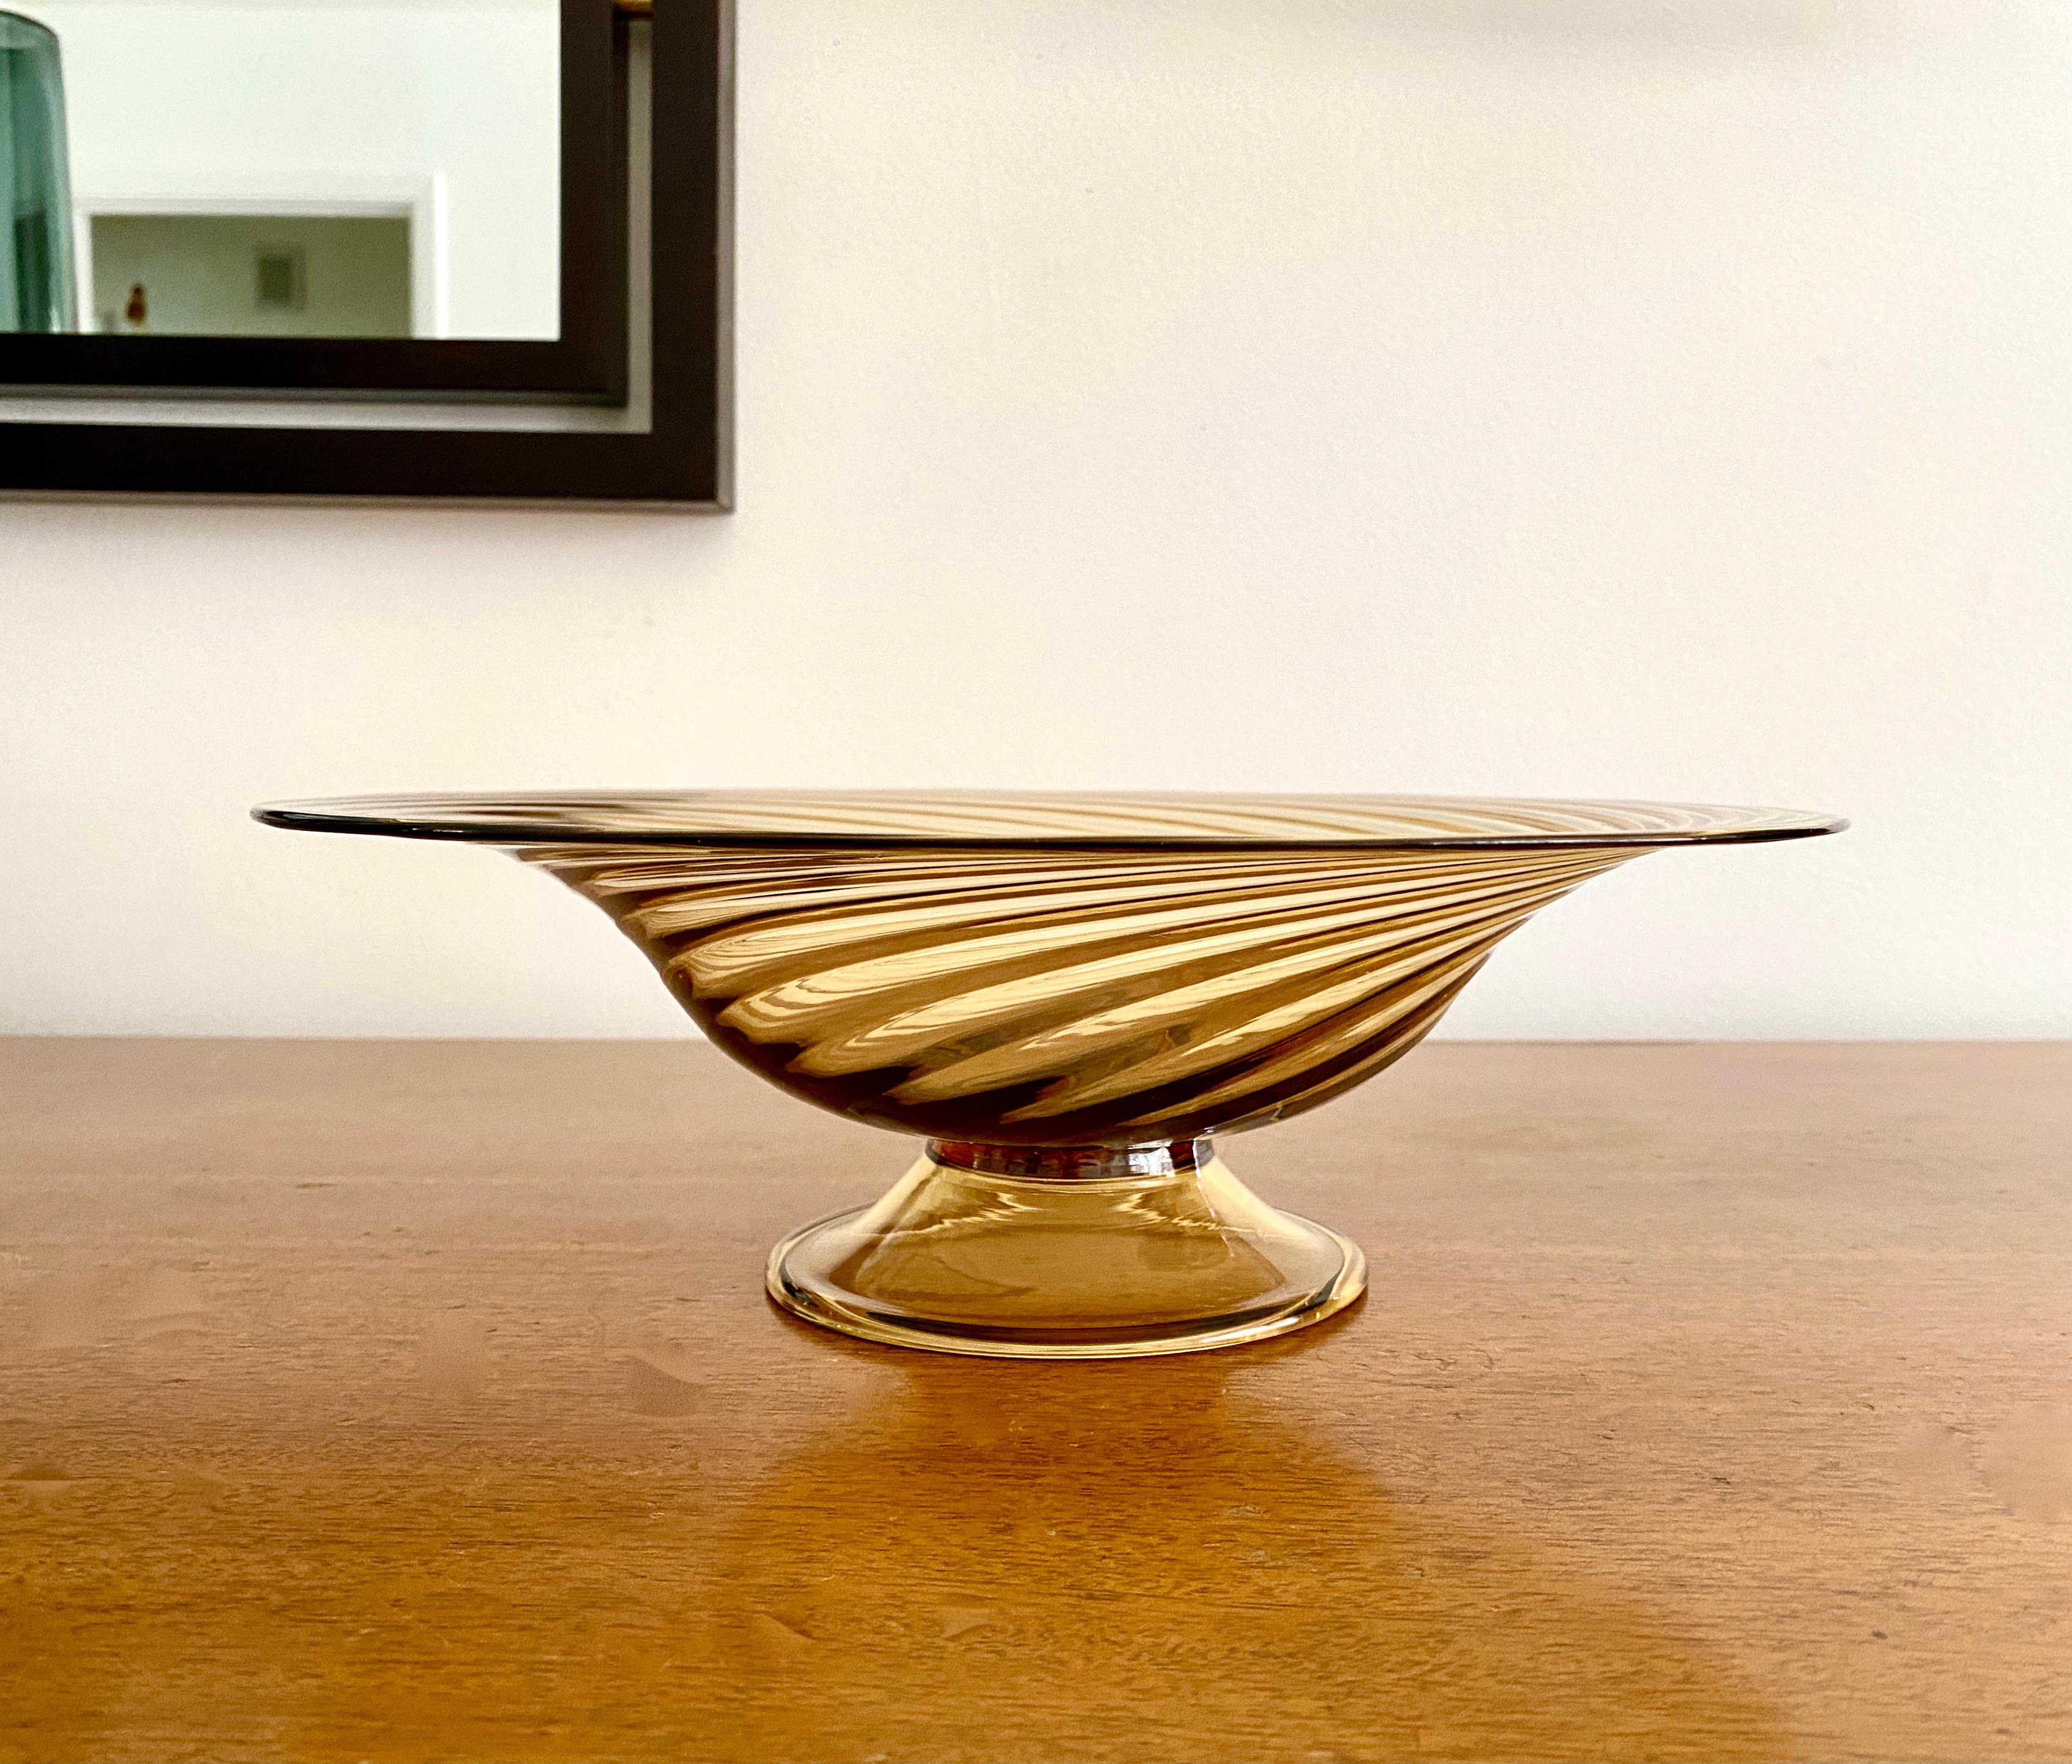 A transparent amber swirl lead glass compote or footed bowl, mold-blown and pattern molded. The compote is acid etched with the Steuben mark on the bottom. The vase was manufactured sometime during the 1920 to 1929 time period during Frederick